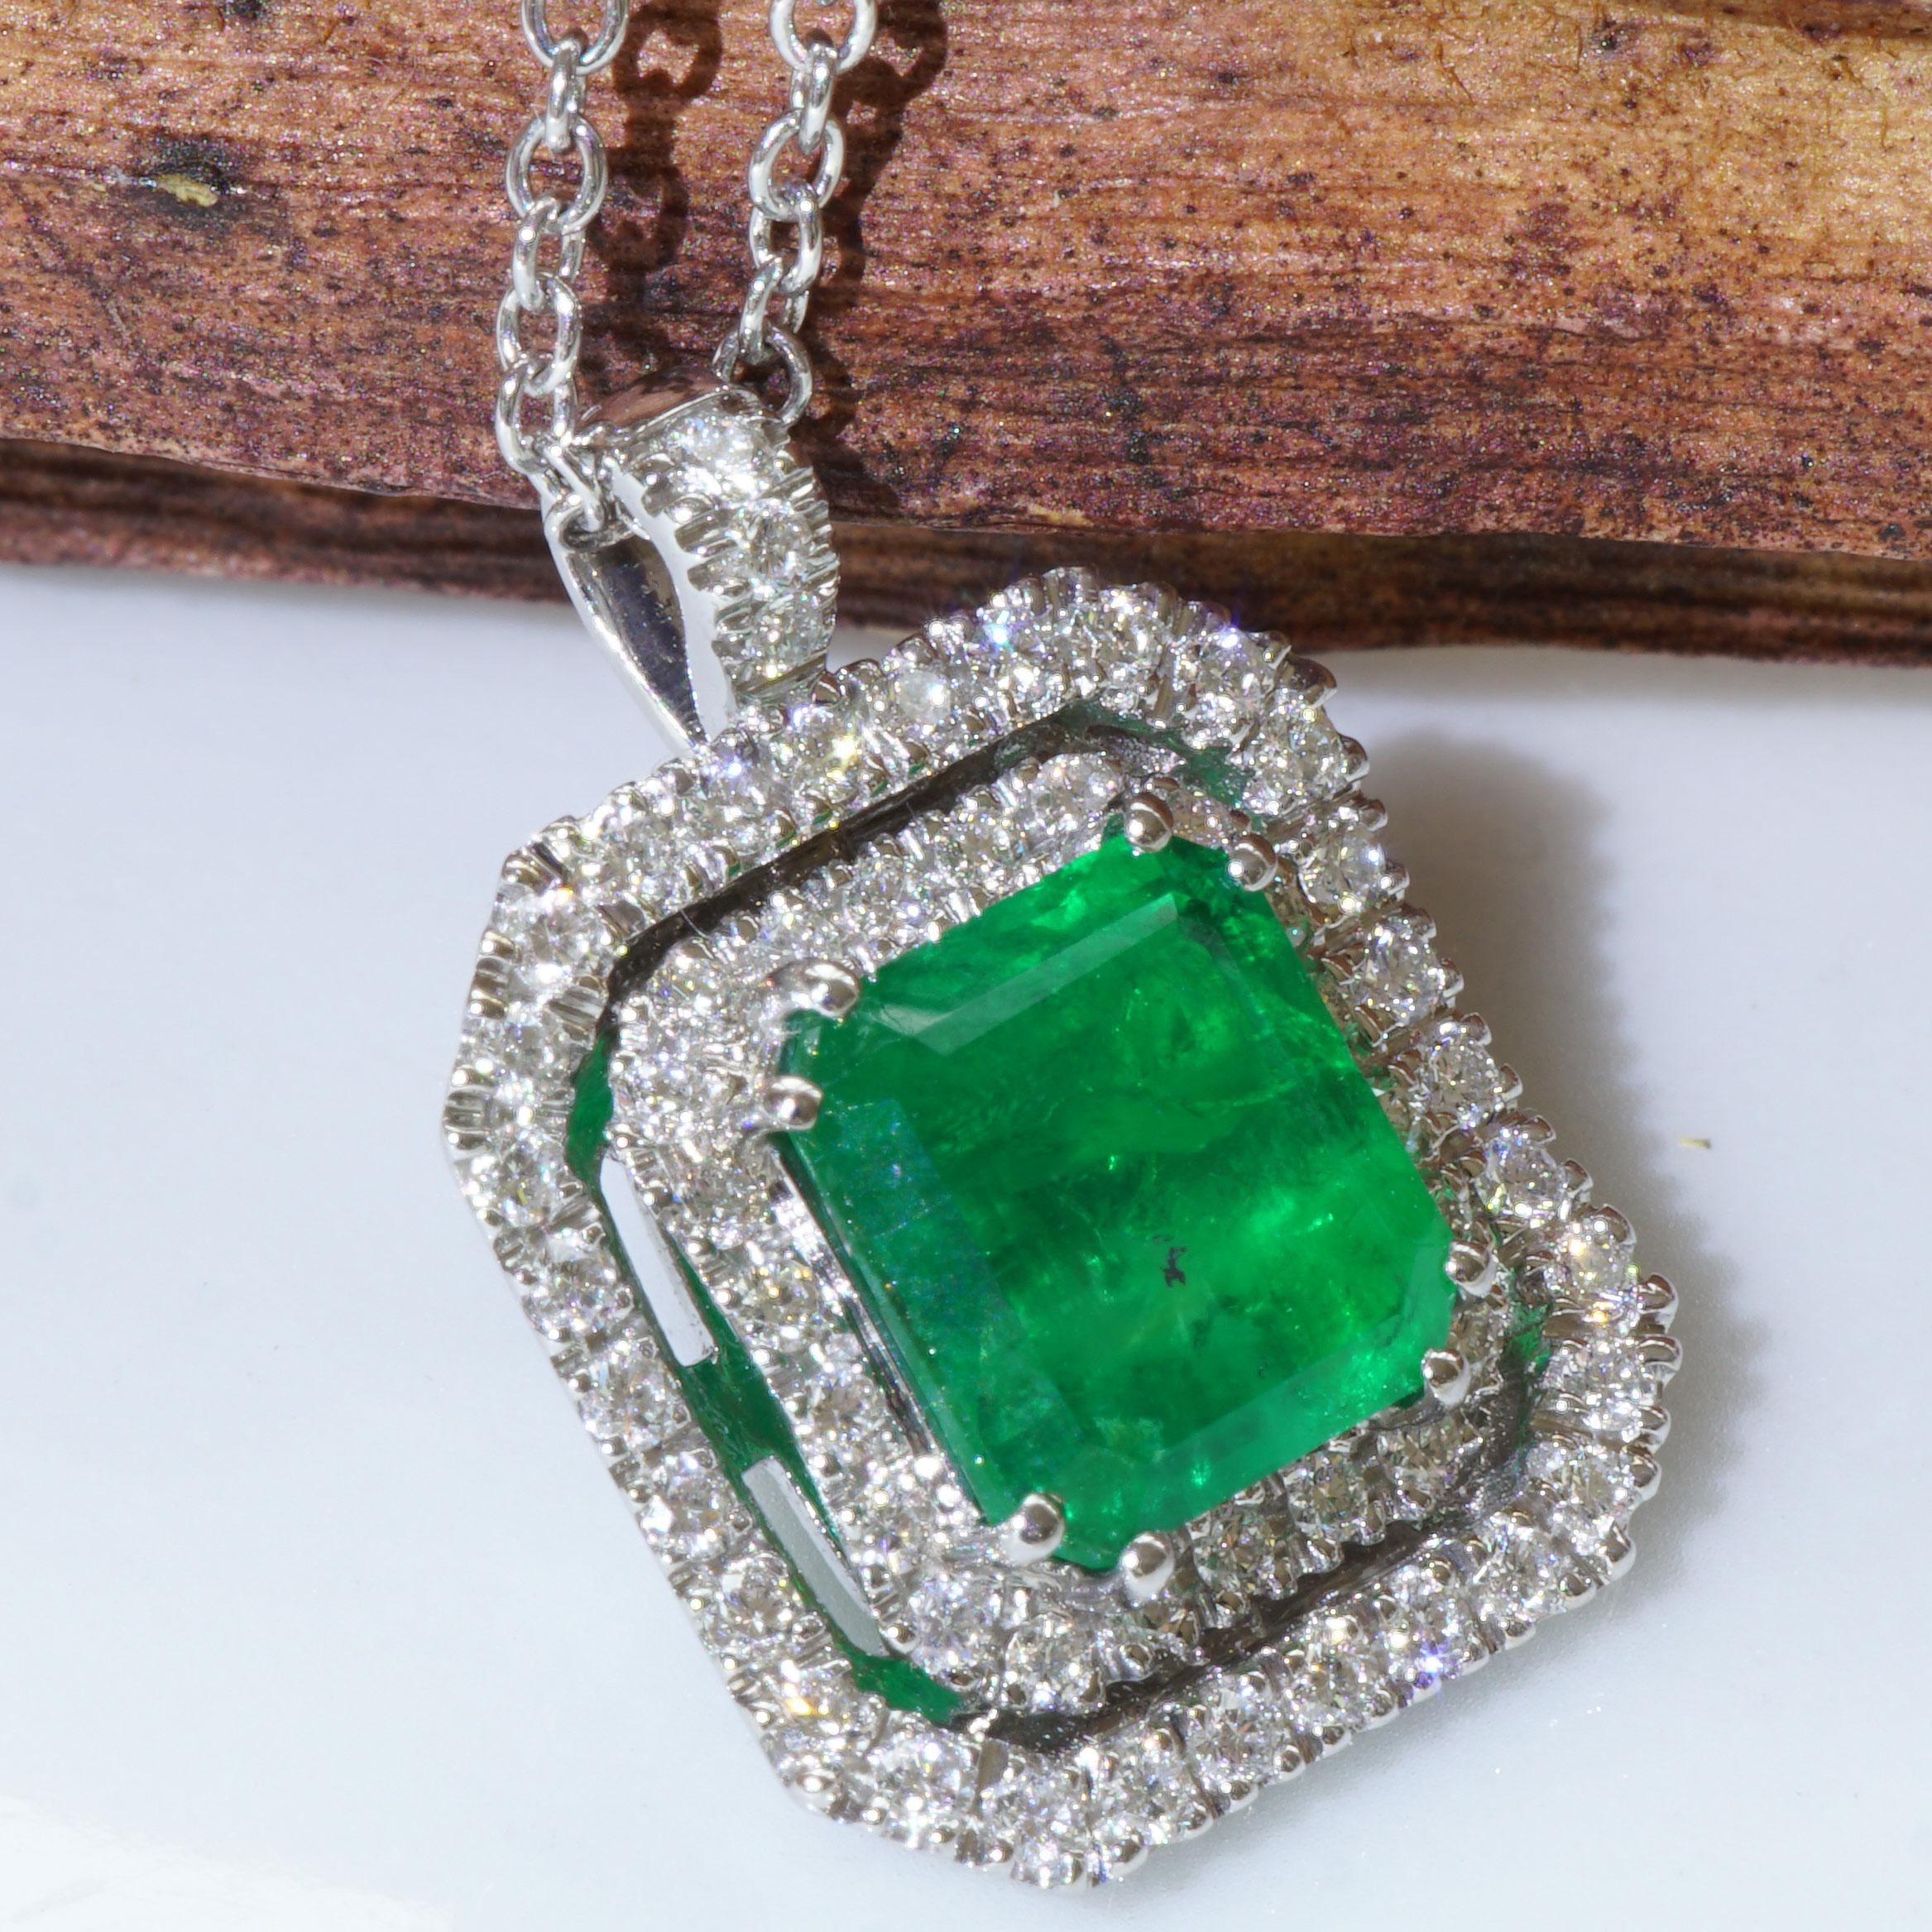 Emerald Cut Emerald Diamond Pendant 3 Ct 0.41 Ct White Gold Panjshir Afghanistan Great Color For Sale